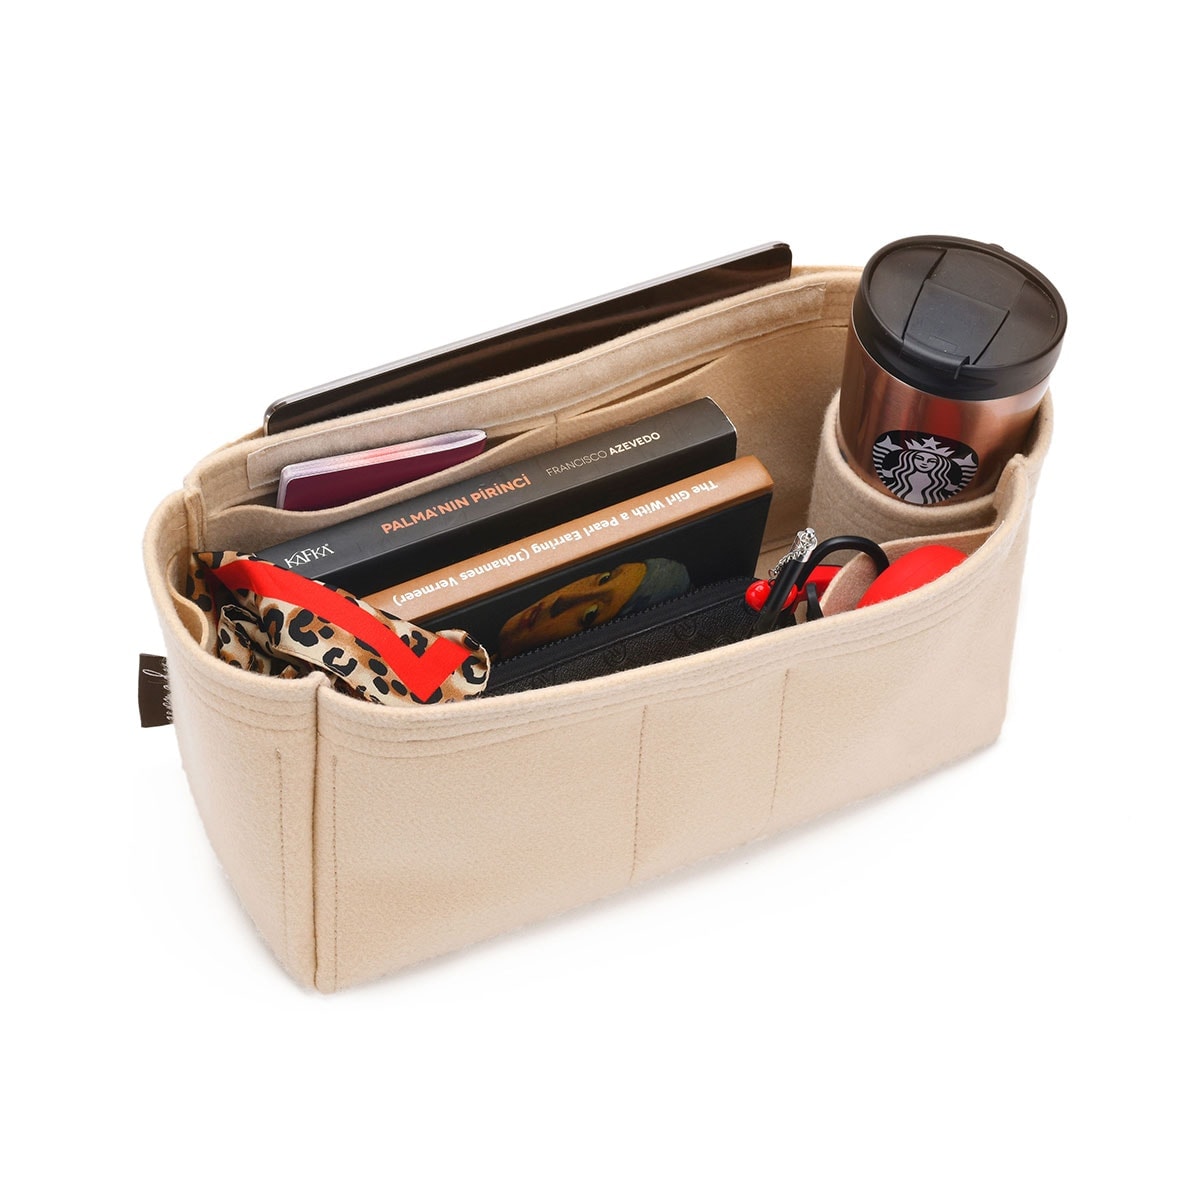 Cuyana Tote Organization Insert, Bag Organizer with Zipper Top Closure and  Single Bottle Holder